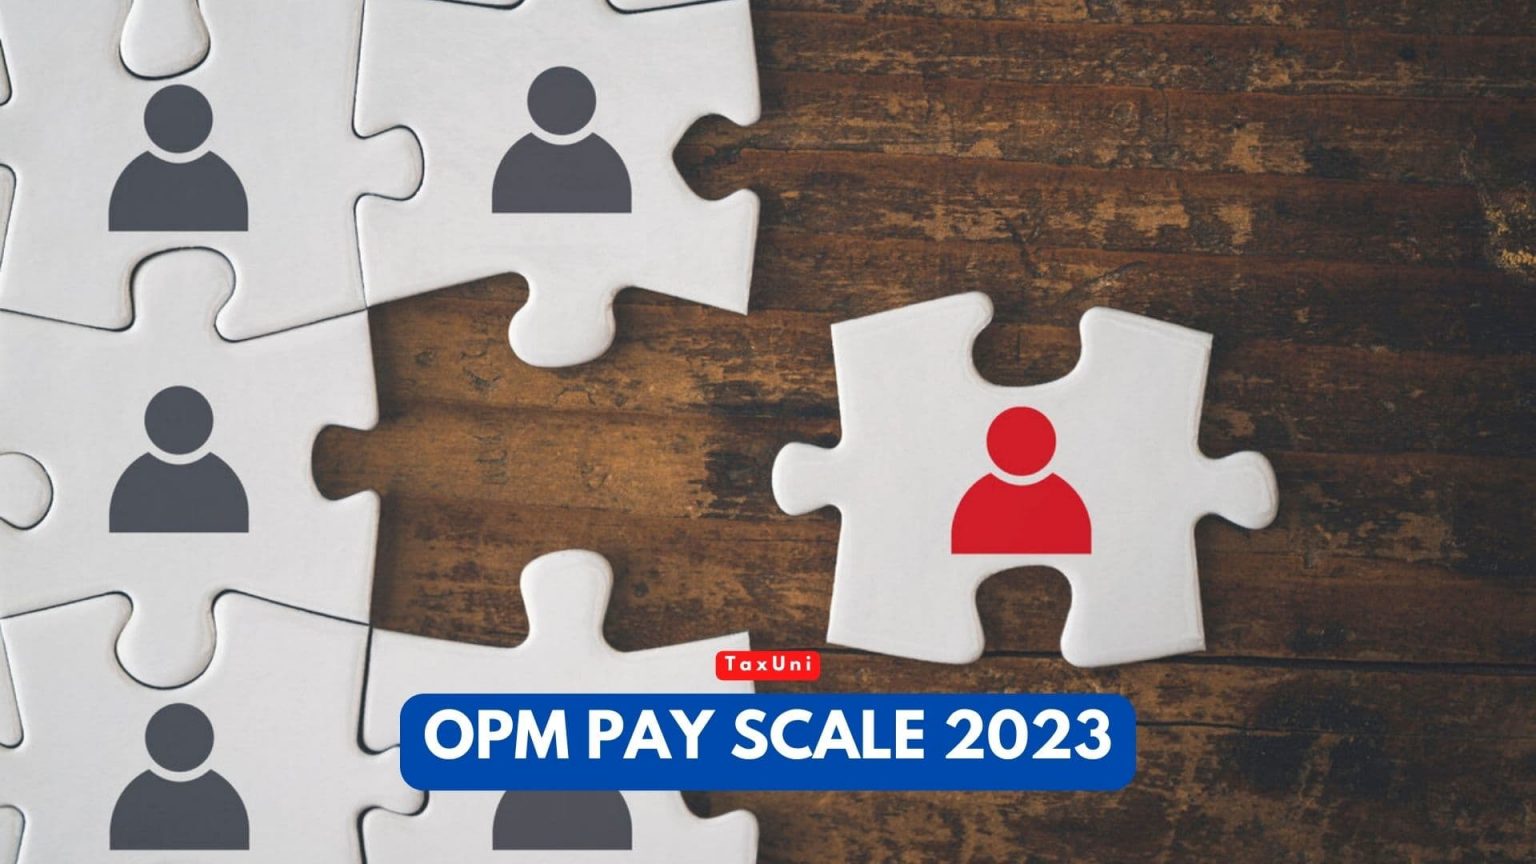 OPM Pay Scale 2023